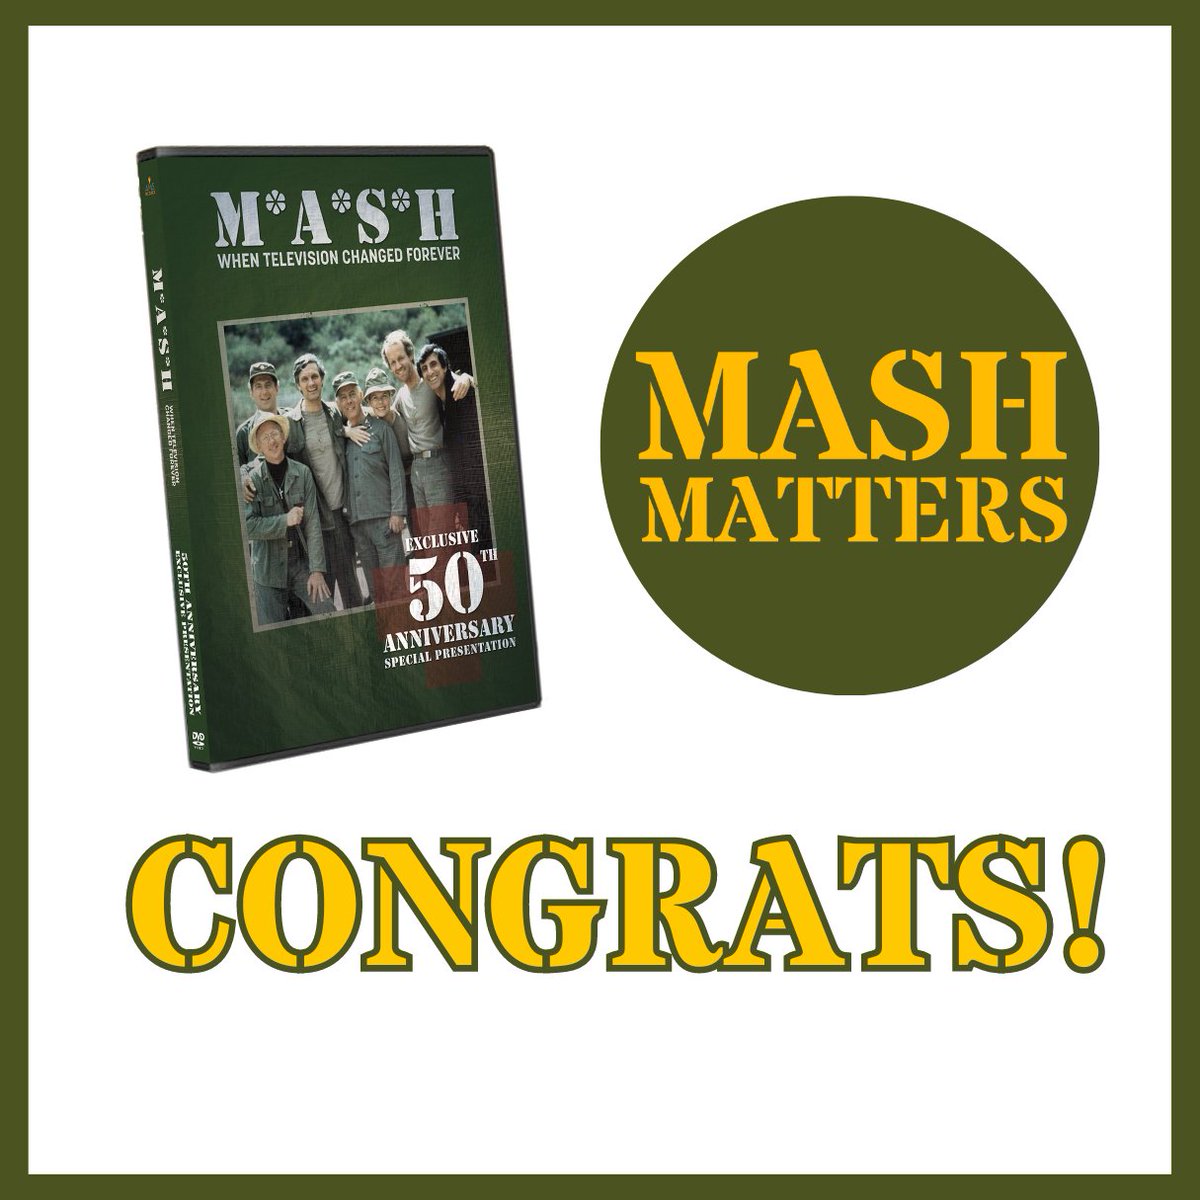 Congrats to the winners of our #MASH DVD giveaway! @DalpesMark @annmarieryan2 @zarate_eric @LazyPuffin2020 @Coffee_Is_love @Rob_LLAP Winners, check your inbox. Thanks to our friends at @amspictures for making this giveaway possible. And thanks to everyone who entered.